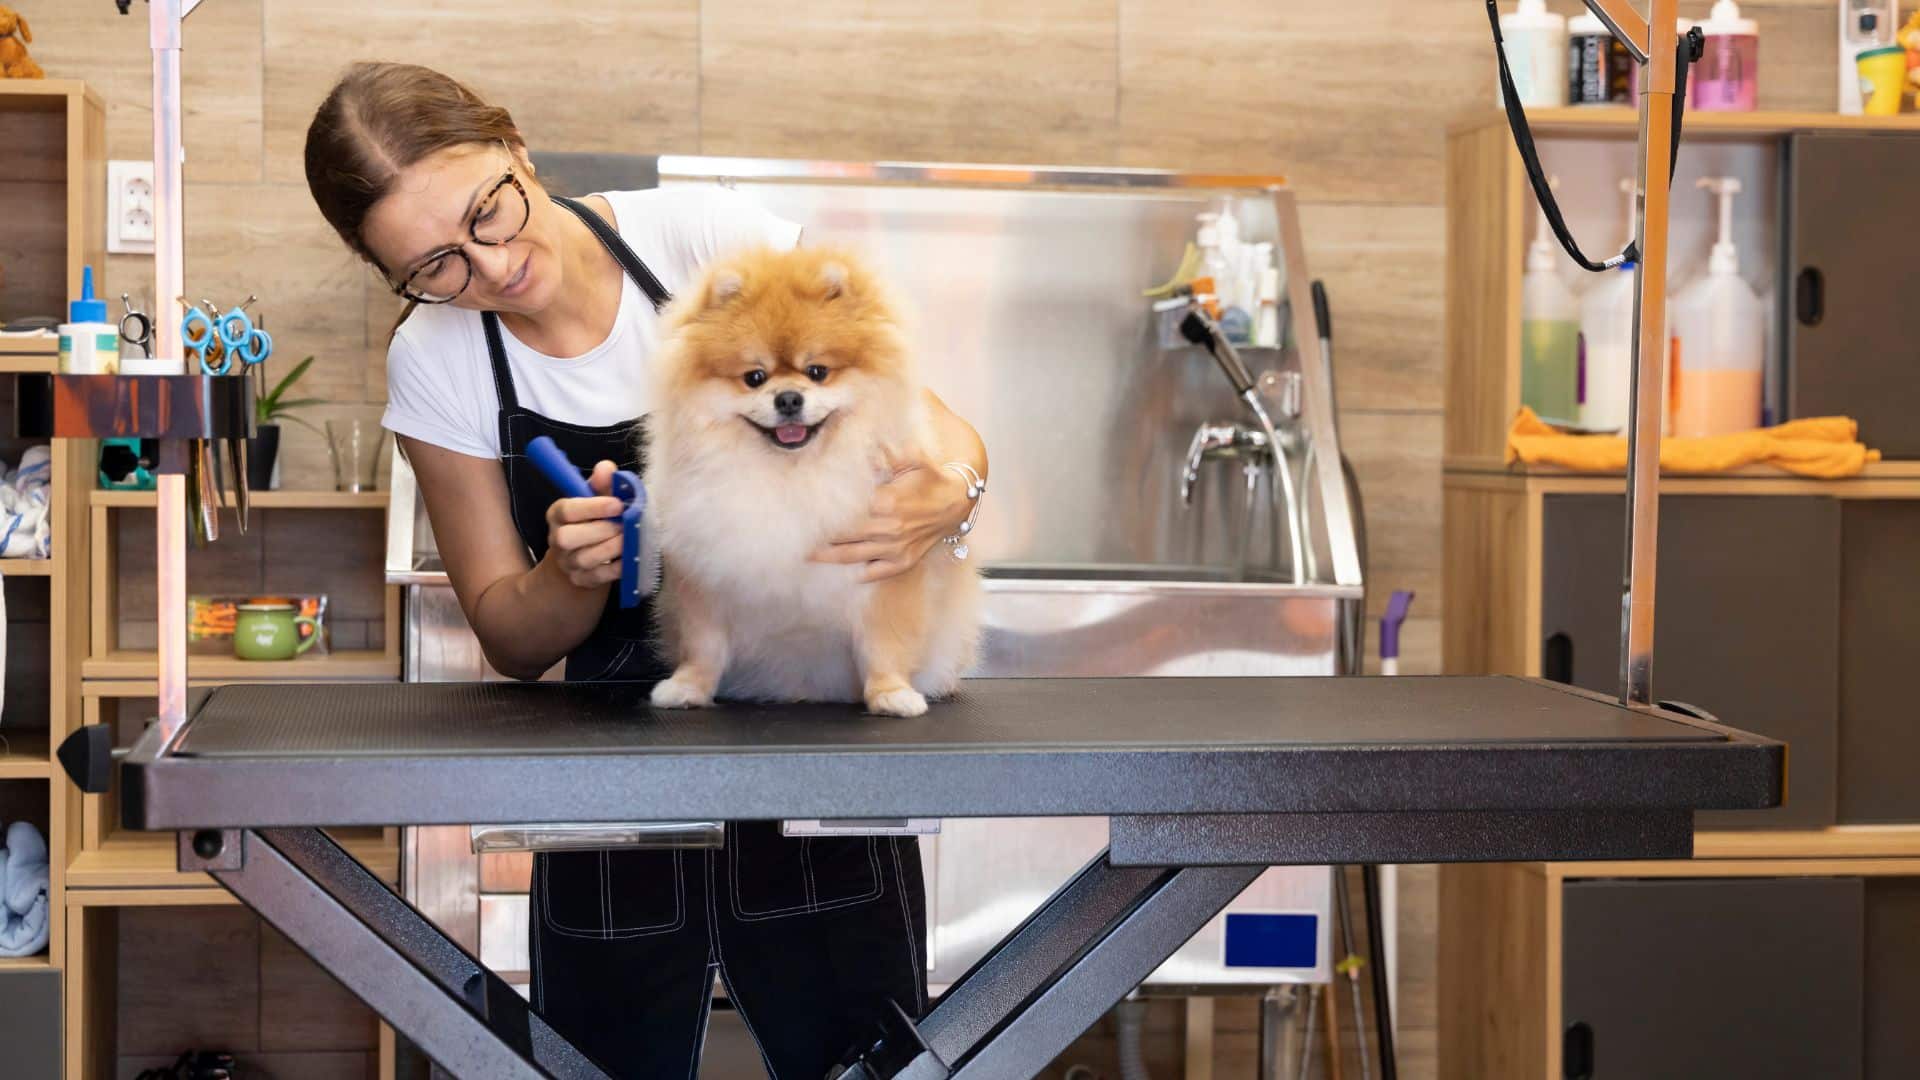 Are dog grooming businesses profitable?